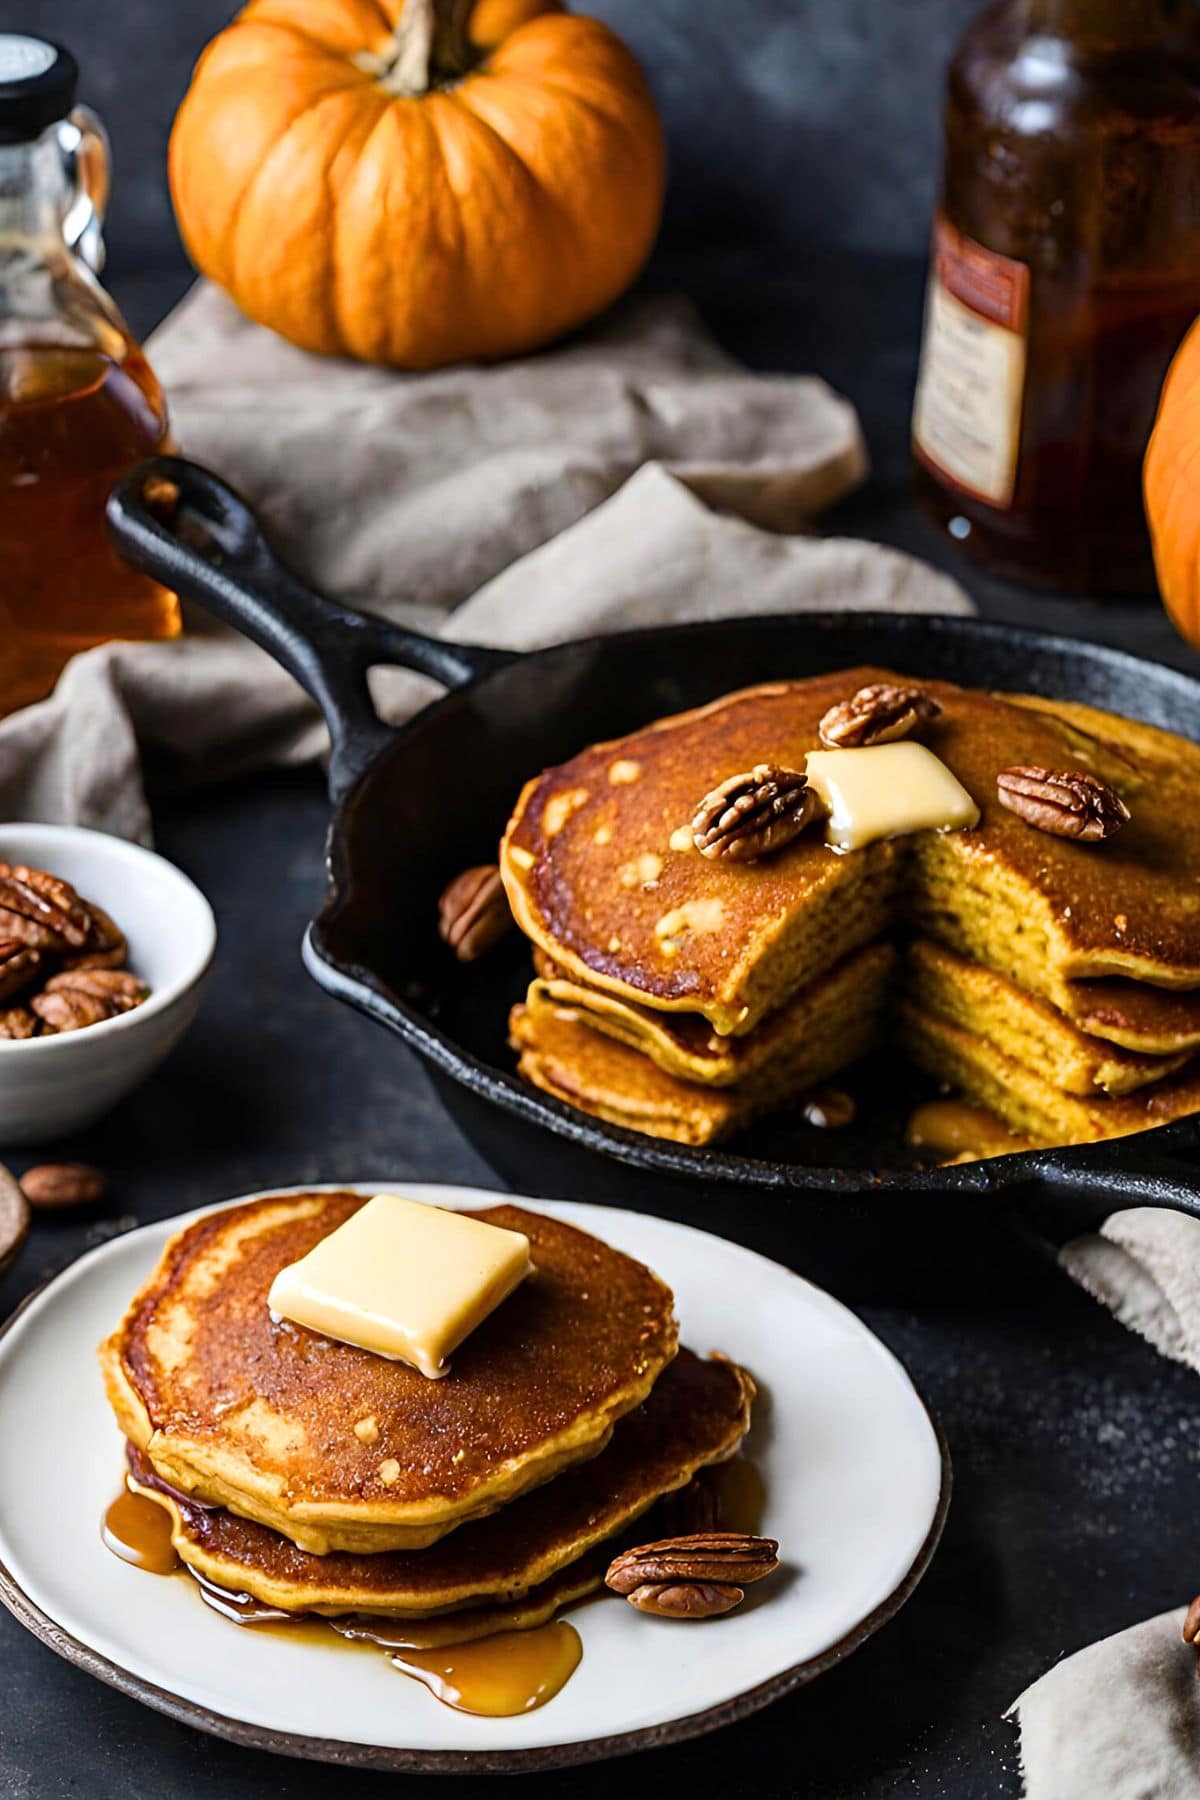 These fluffy pumpkin pancakes are perfect for cozy fall weekend mornings. Loaded with pumpkin and warming spices, they are nourishing, flavorful and comforting. Vegan-adaptable and GF-adaptable!